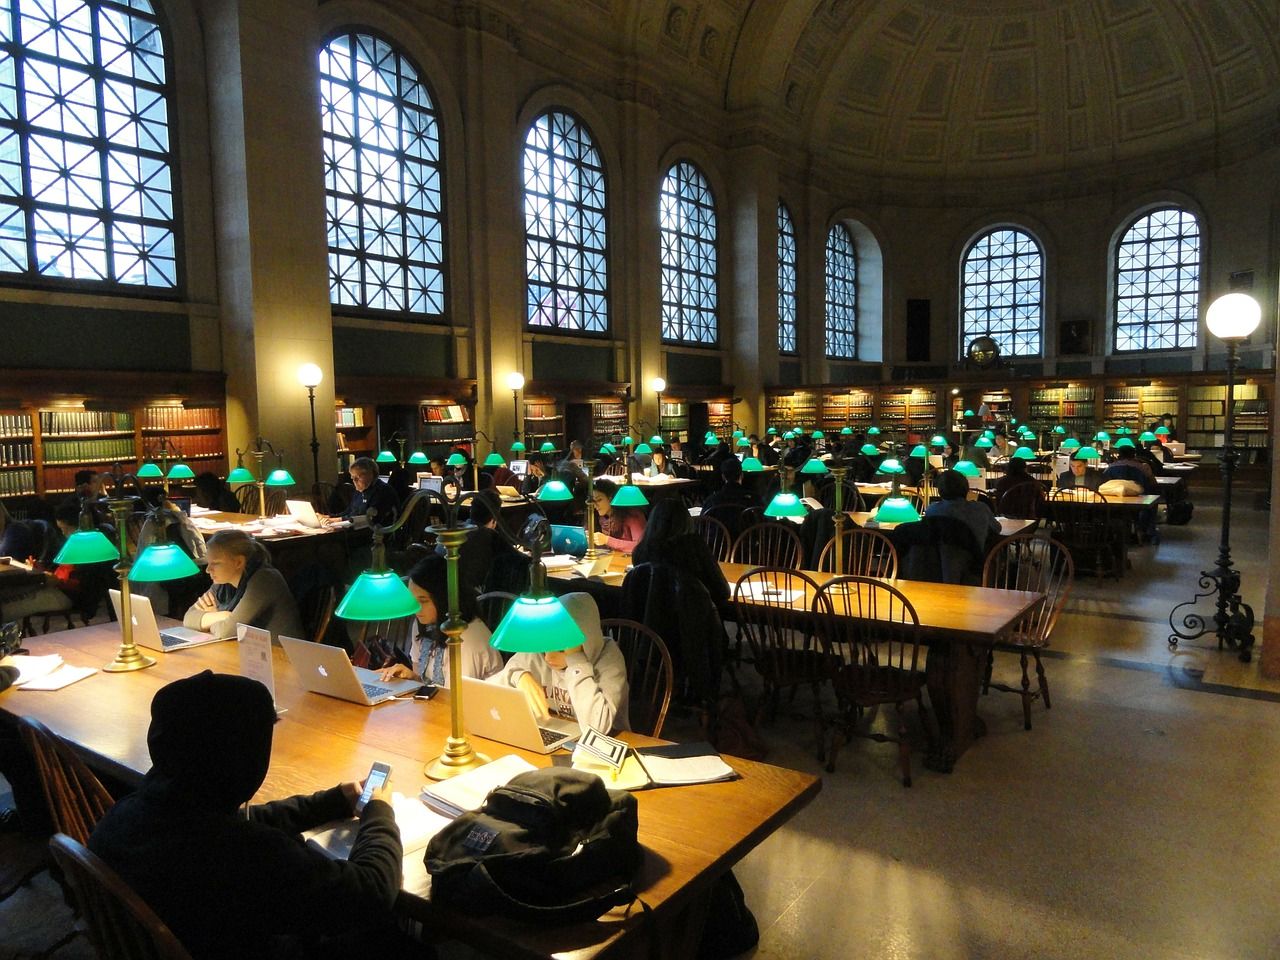 inside a large library with small lights on at each table